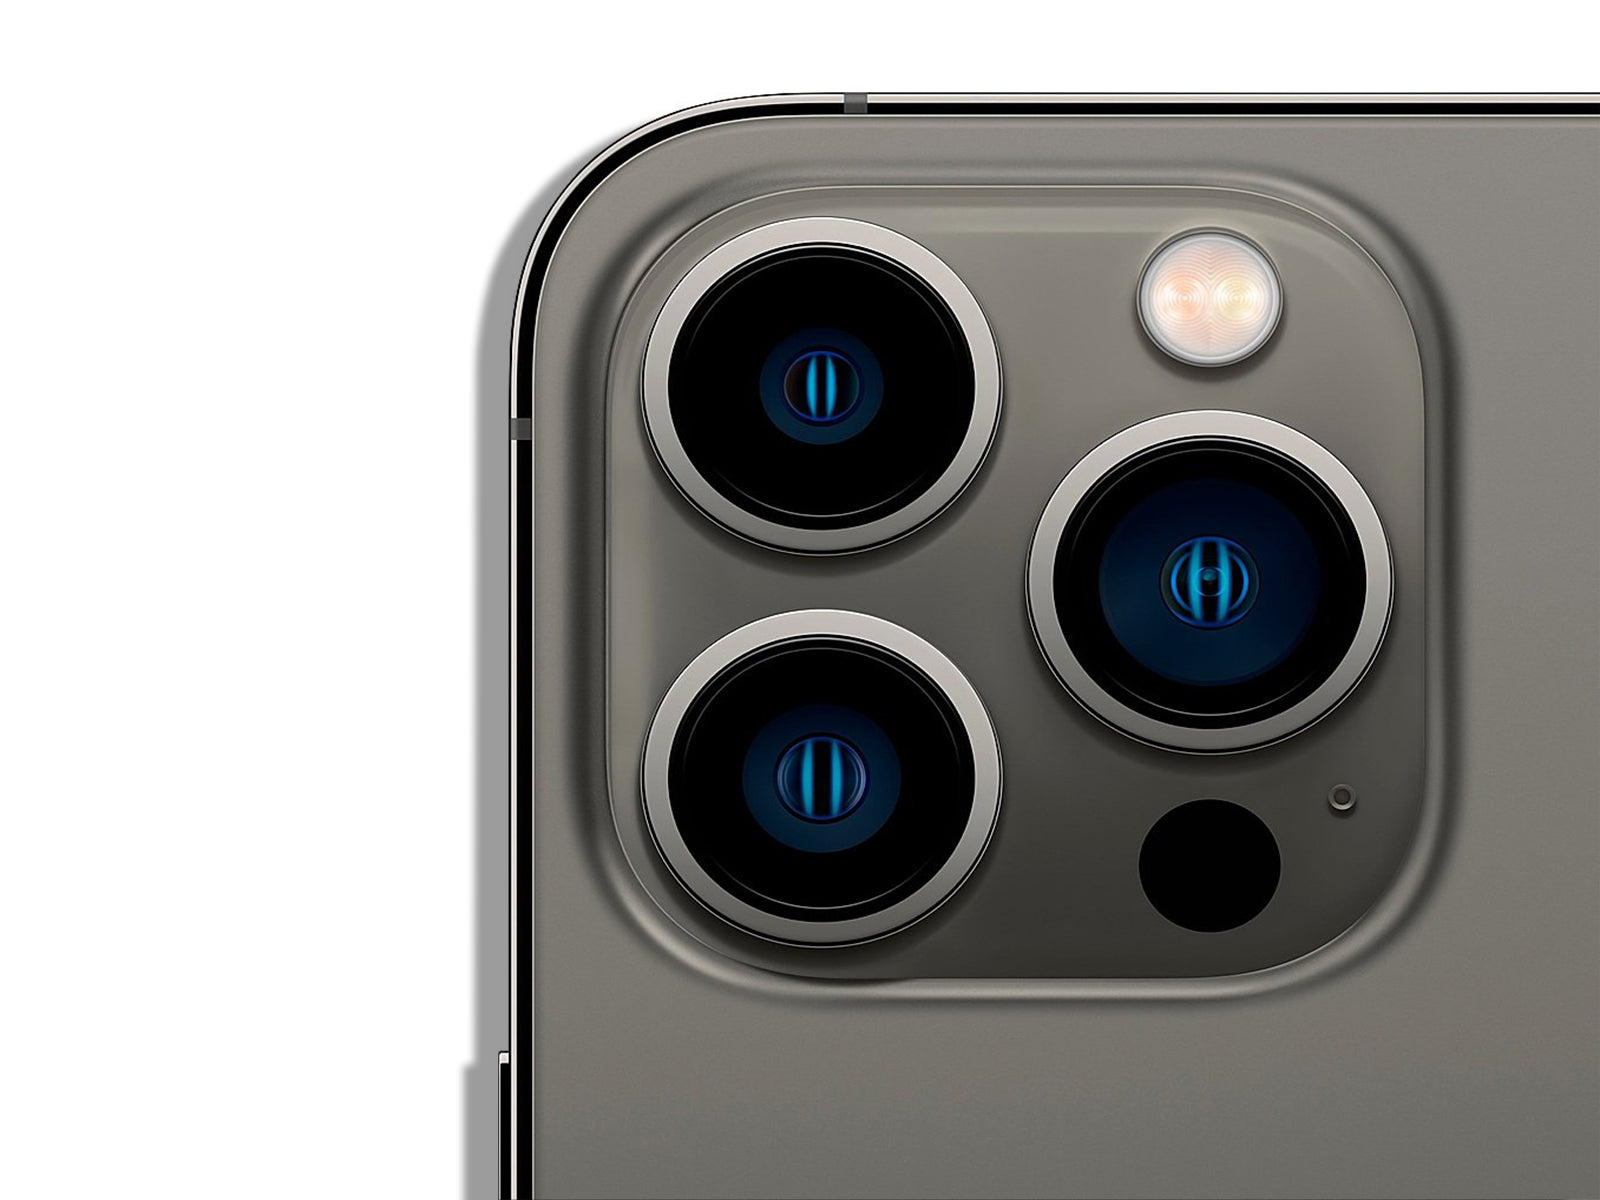 Image shows close up of camera for Graphite iPhone 13 Pro on white background